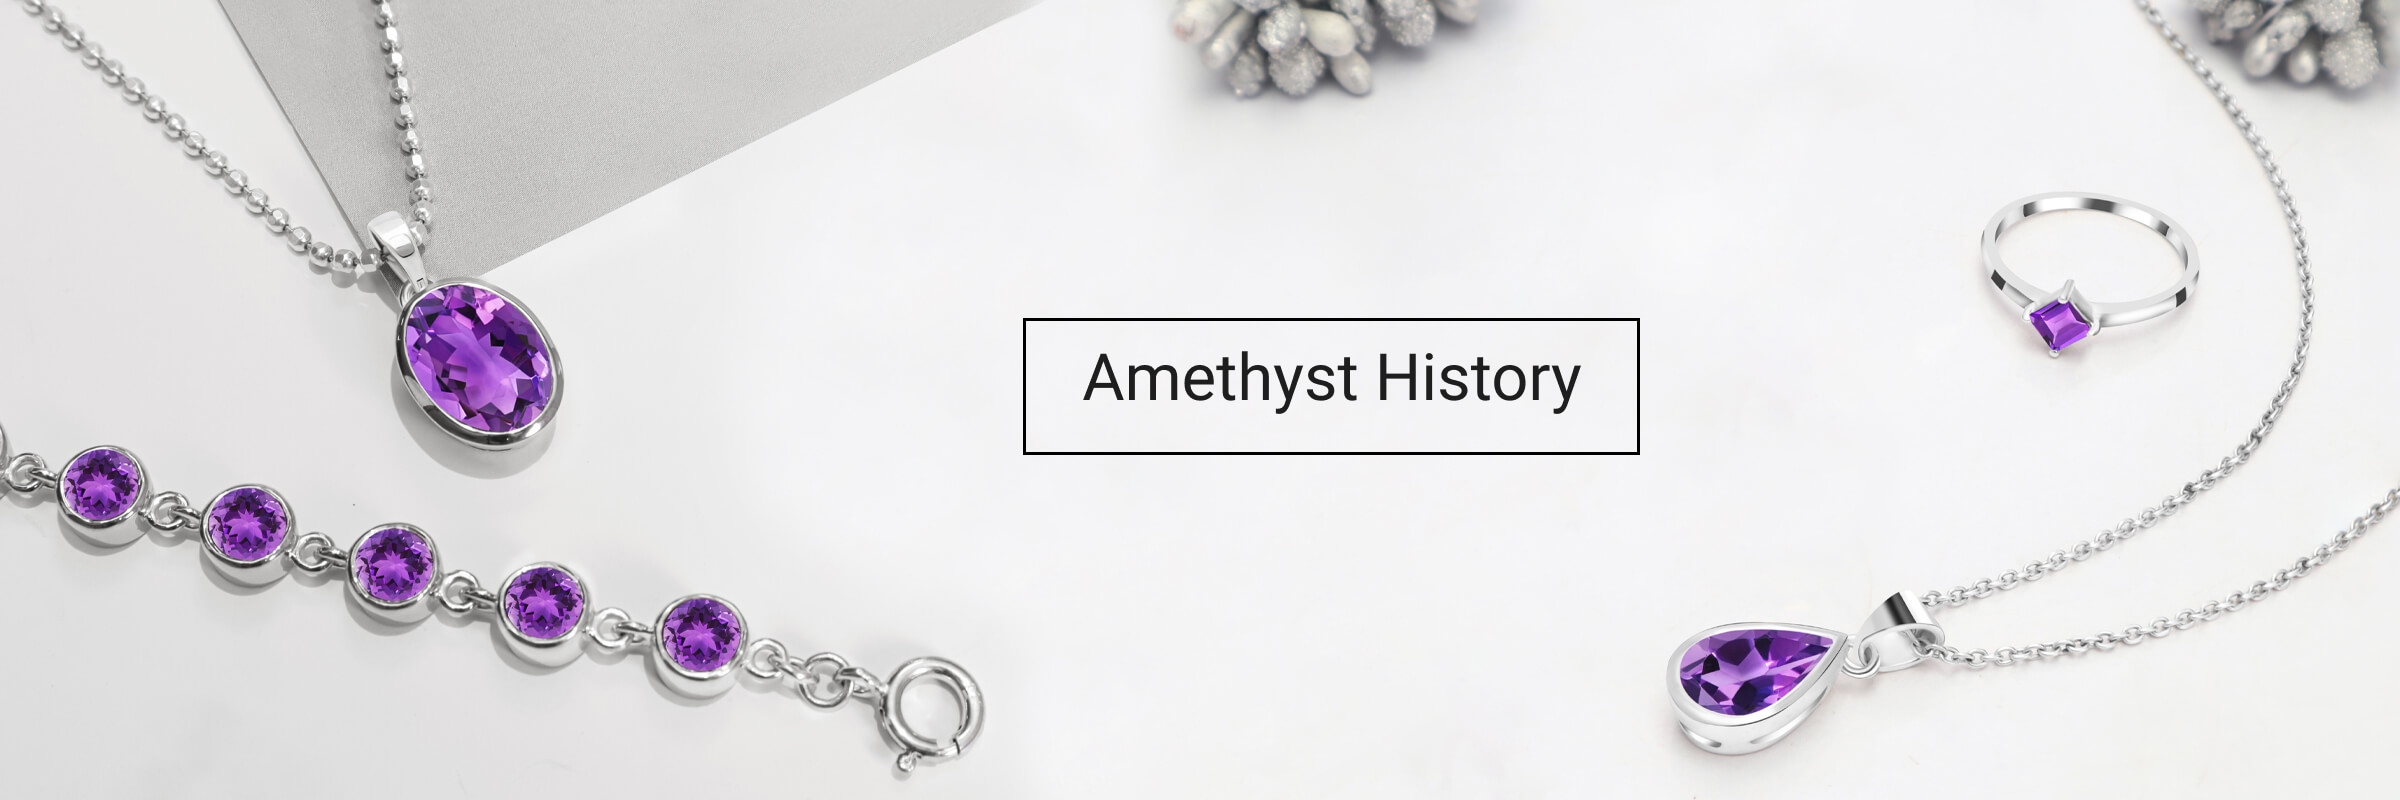 What Is The History of Amethyst? Where are Amethyst Found?